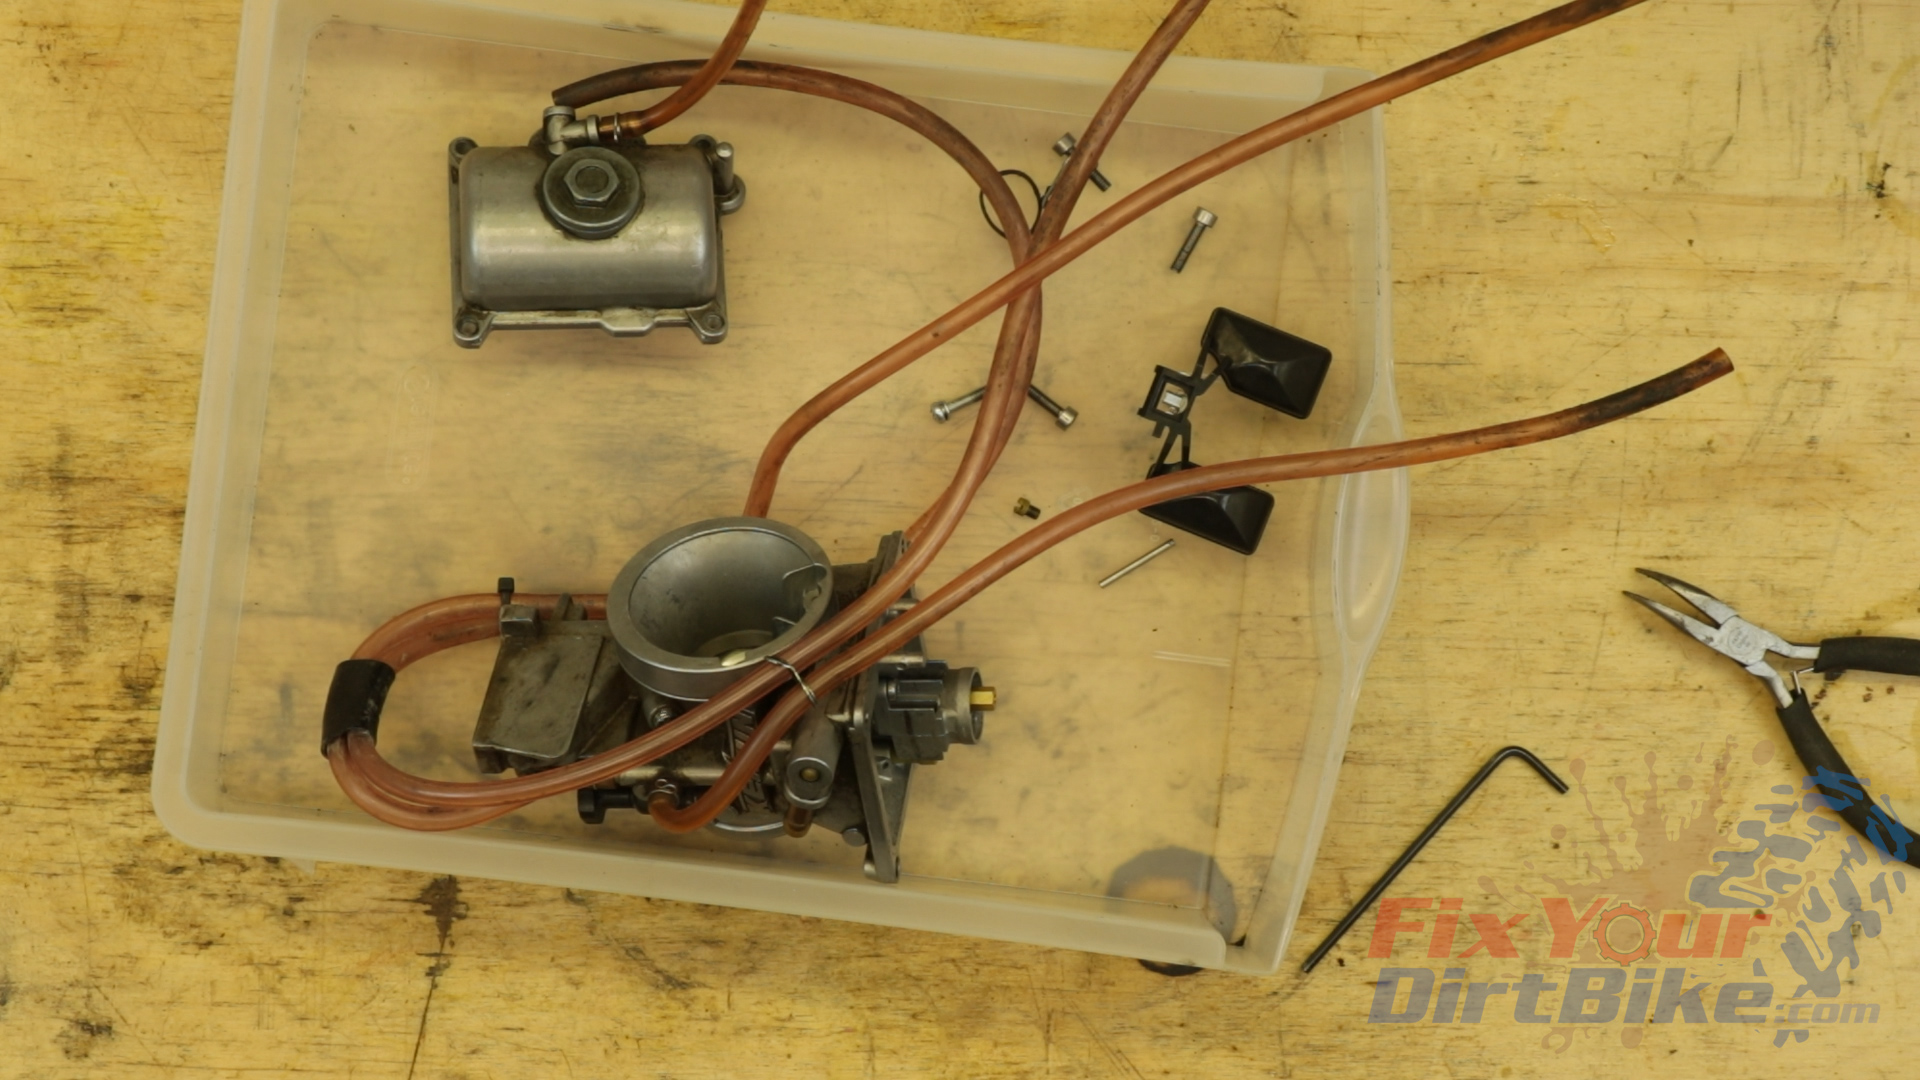 Completely Disassemble Your Carburetor Before Soaking In Pine-Sol